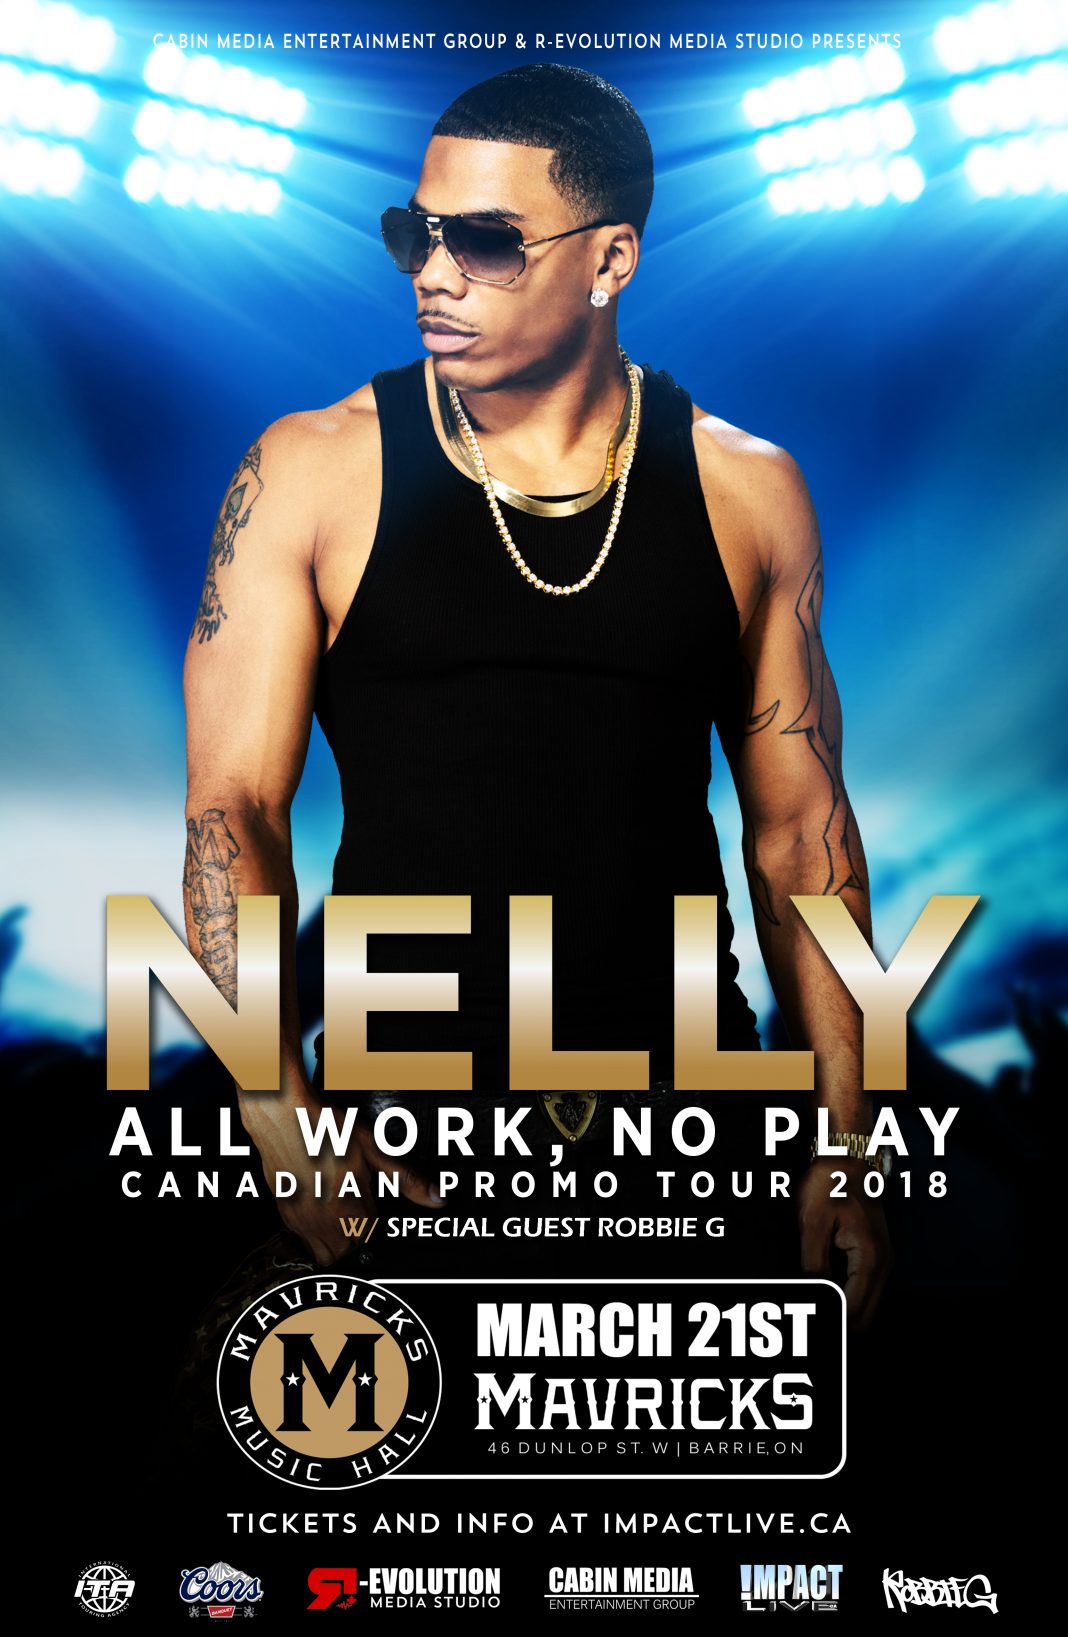 Nelly Announces “ALL WORK NO PLAY” Canadian Promo And Concert Tour